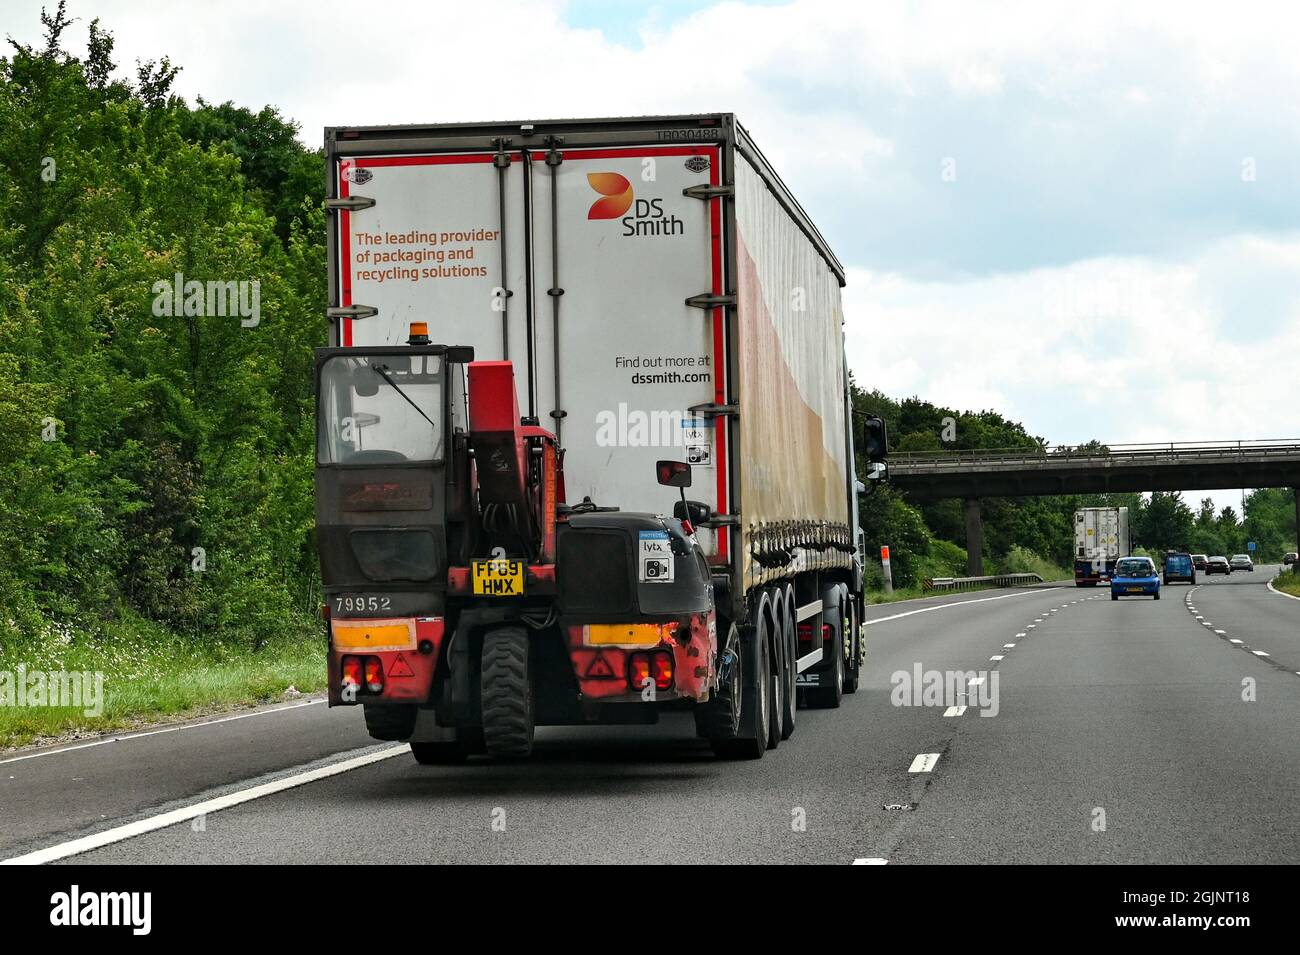 Swindon, England - June 2021: Articulated lorry carrying its own fork lift truck for unloading Stock Photo